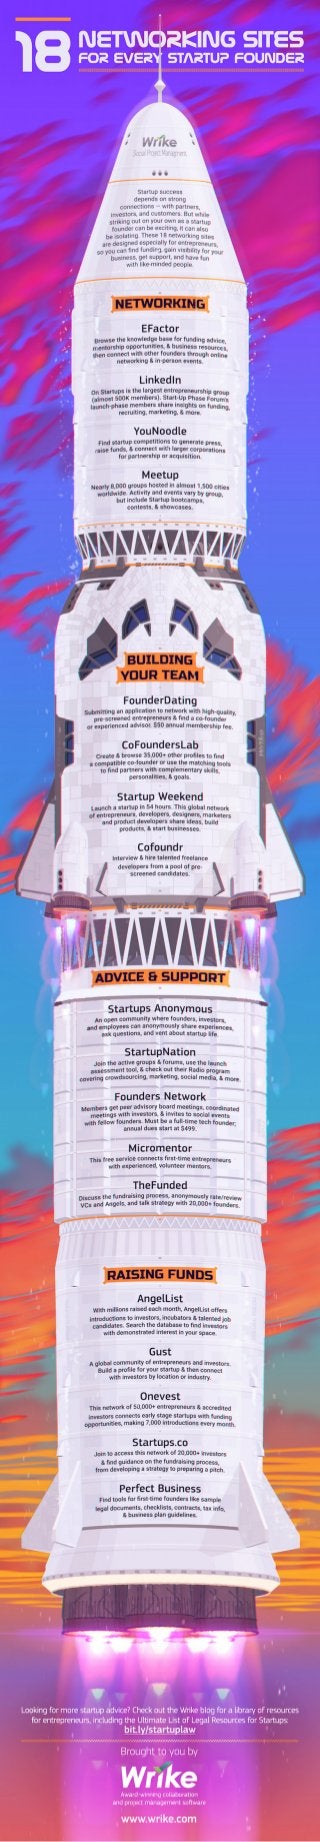 Top Networking Sites for Startup Founders (Infographic)